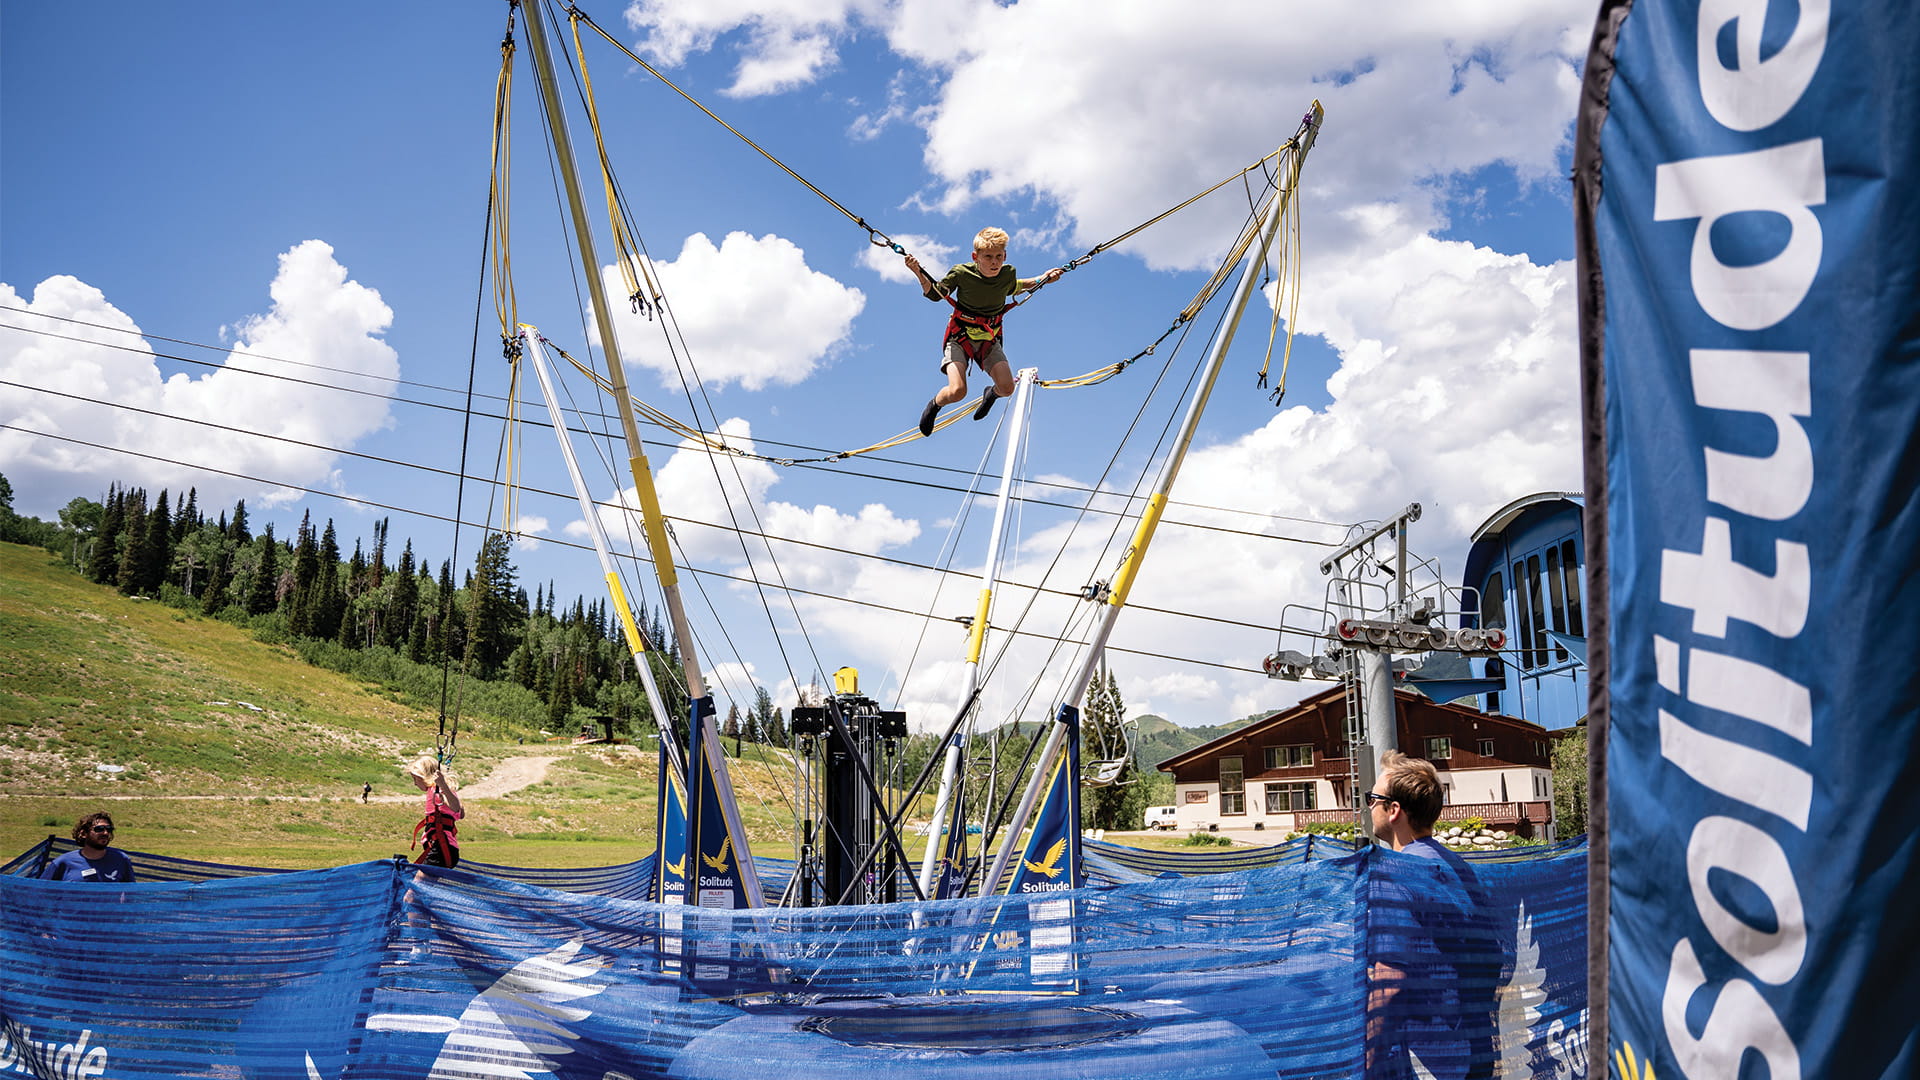 Child jumping on the bungee trampoline at the adventure park at Solitude